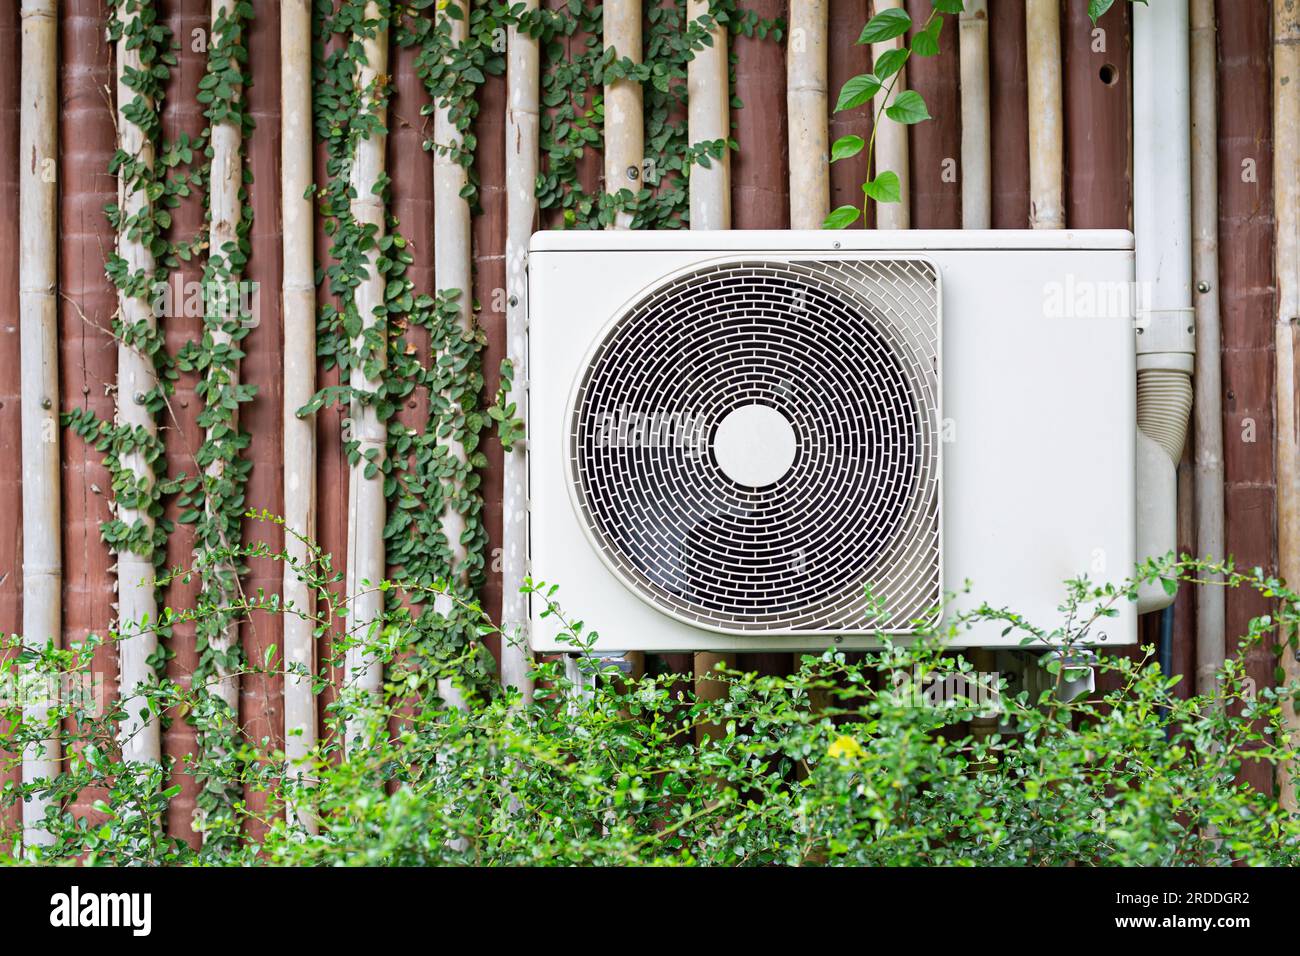 The air conditioner is mounted on the wall with the trees of the building with the garden in the front row. Stock Photo